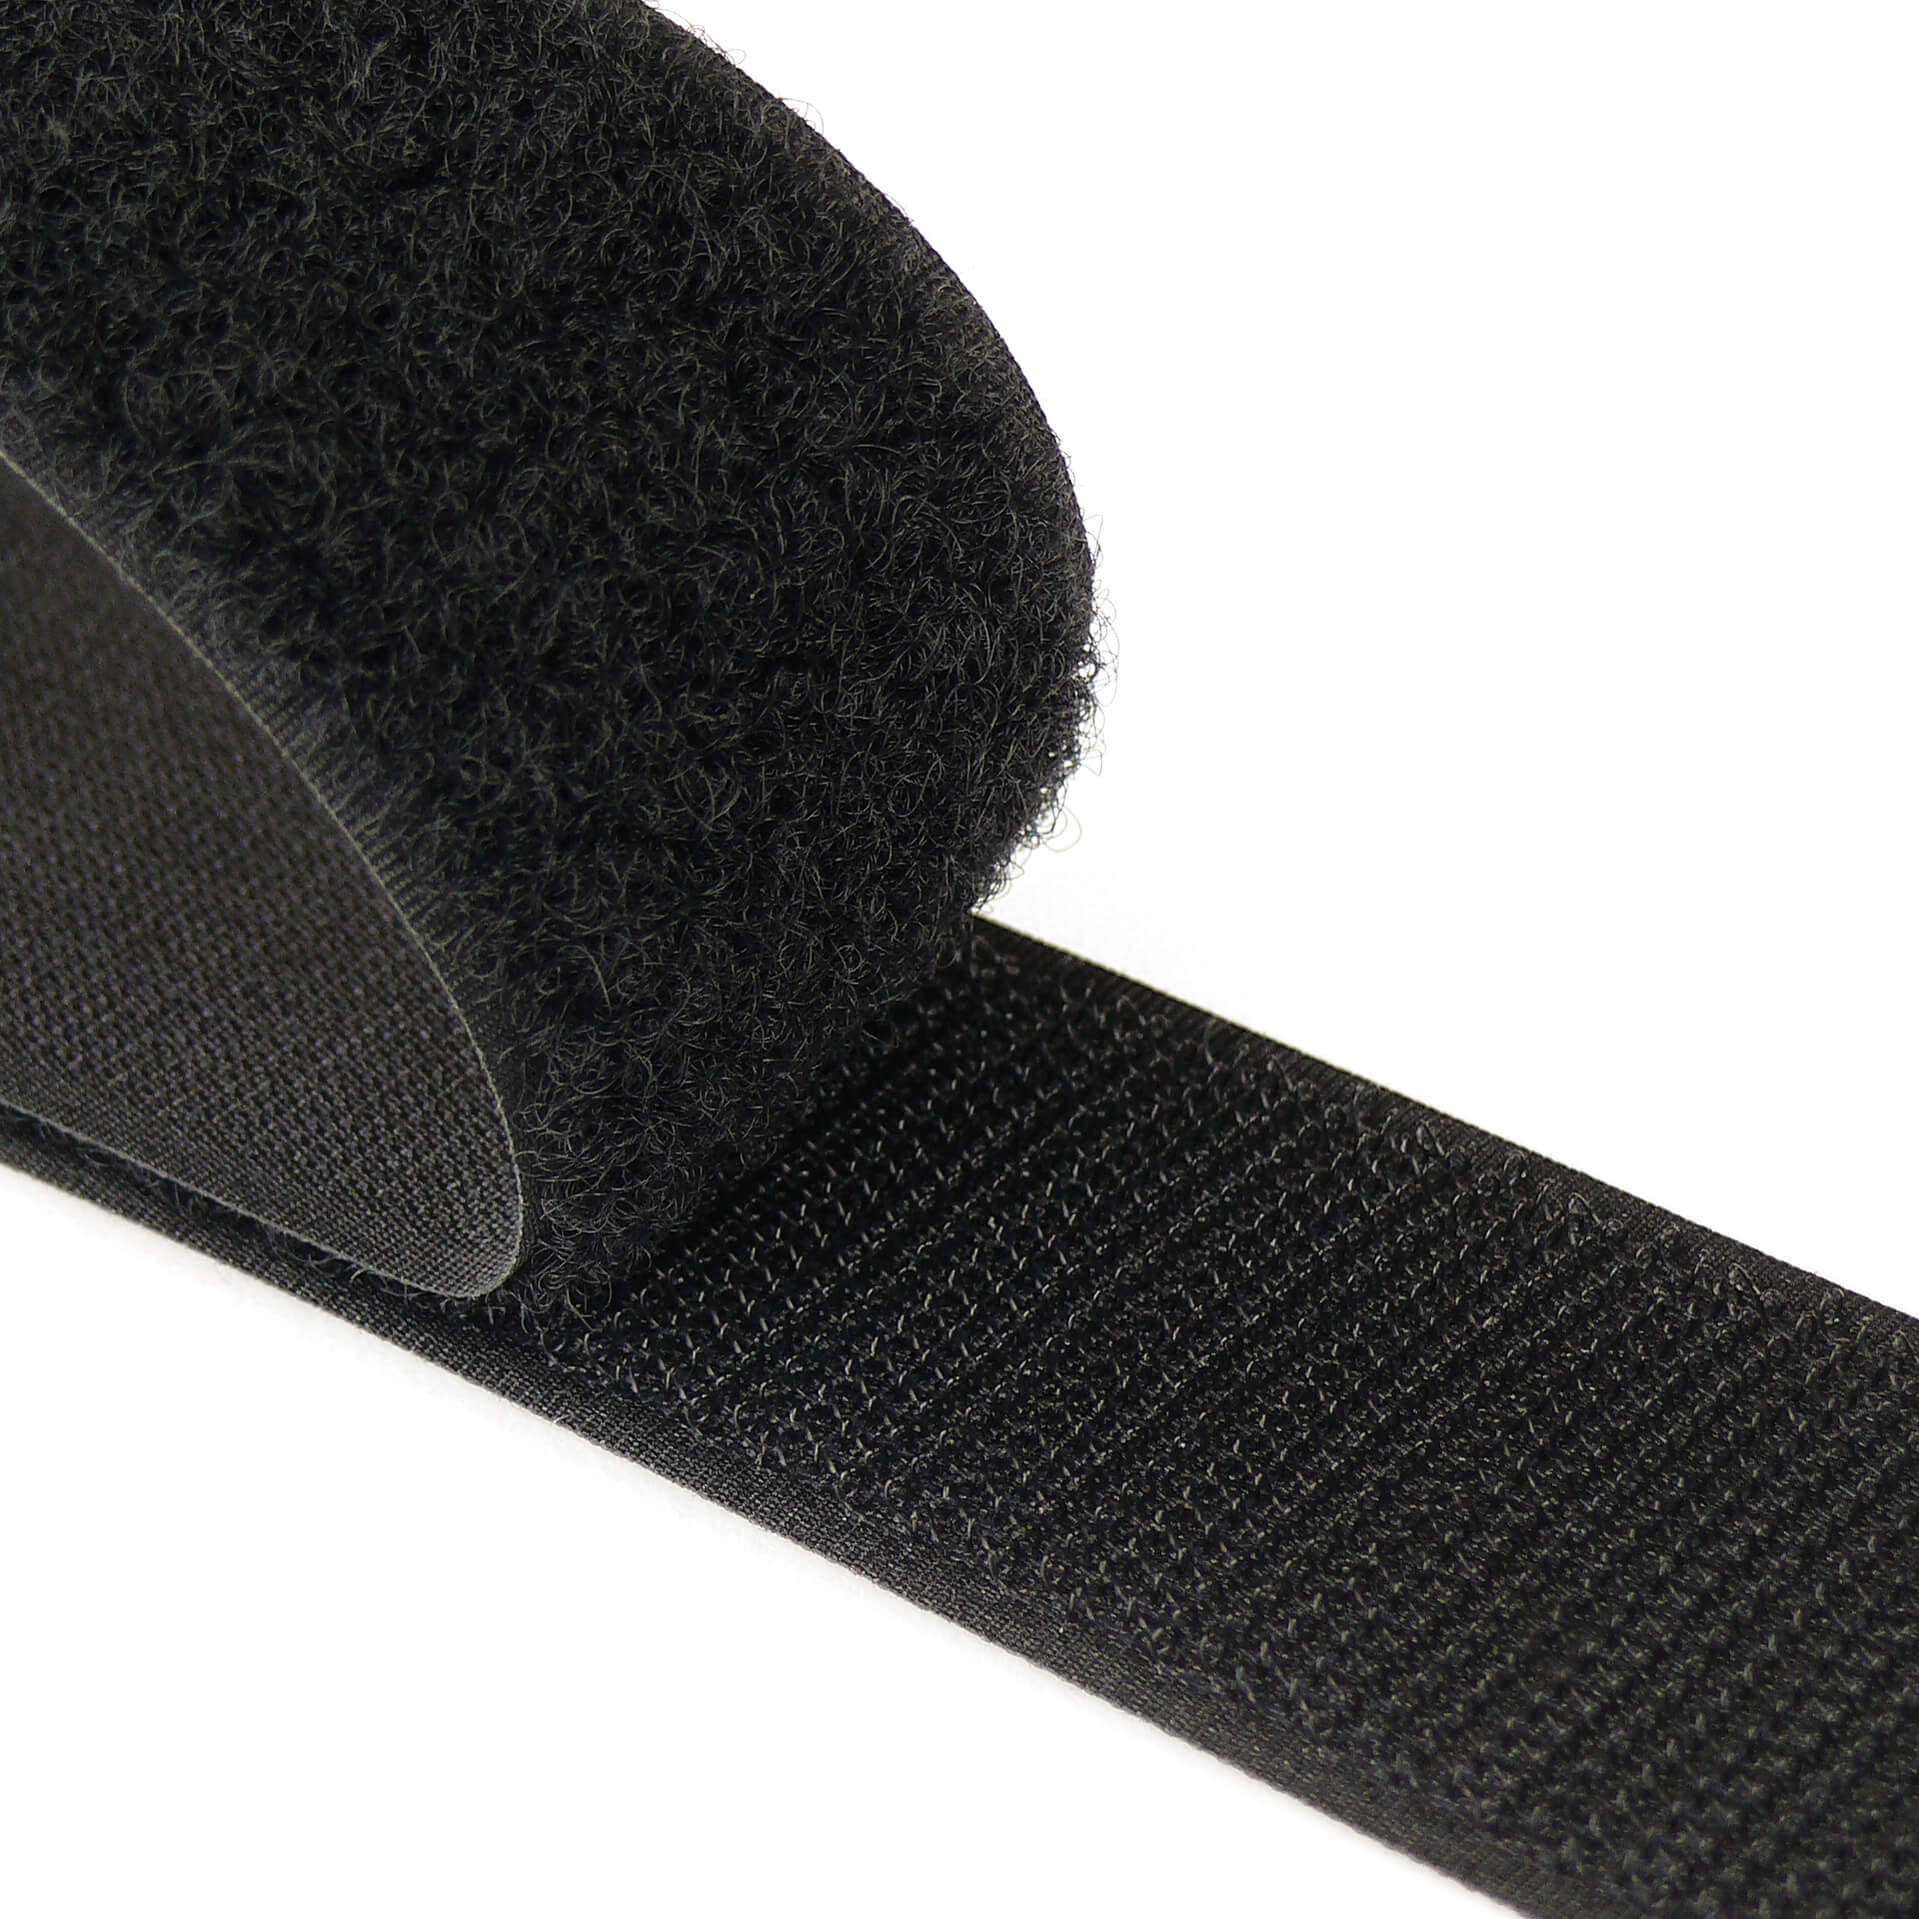 Velcro band roll, 20 mm. wide